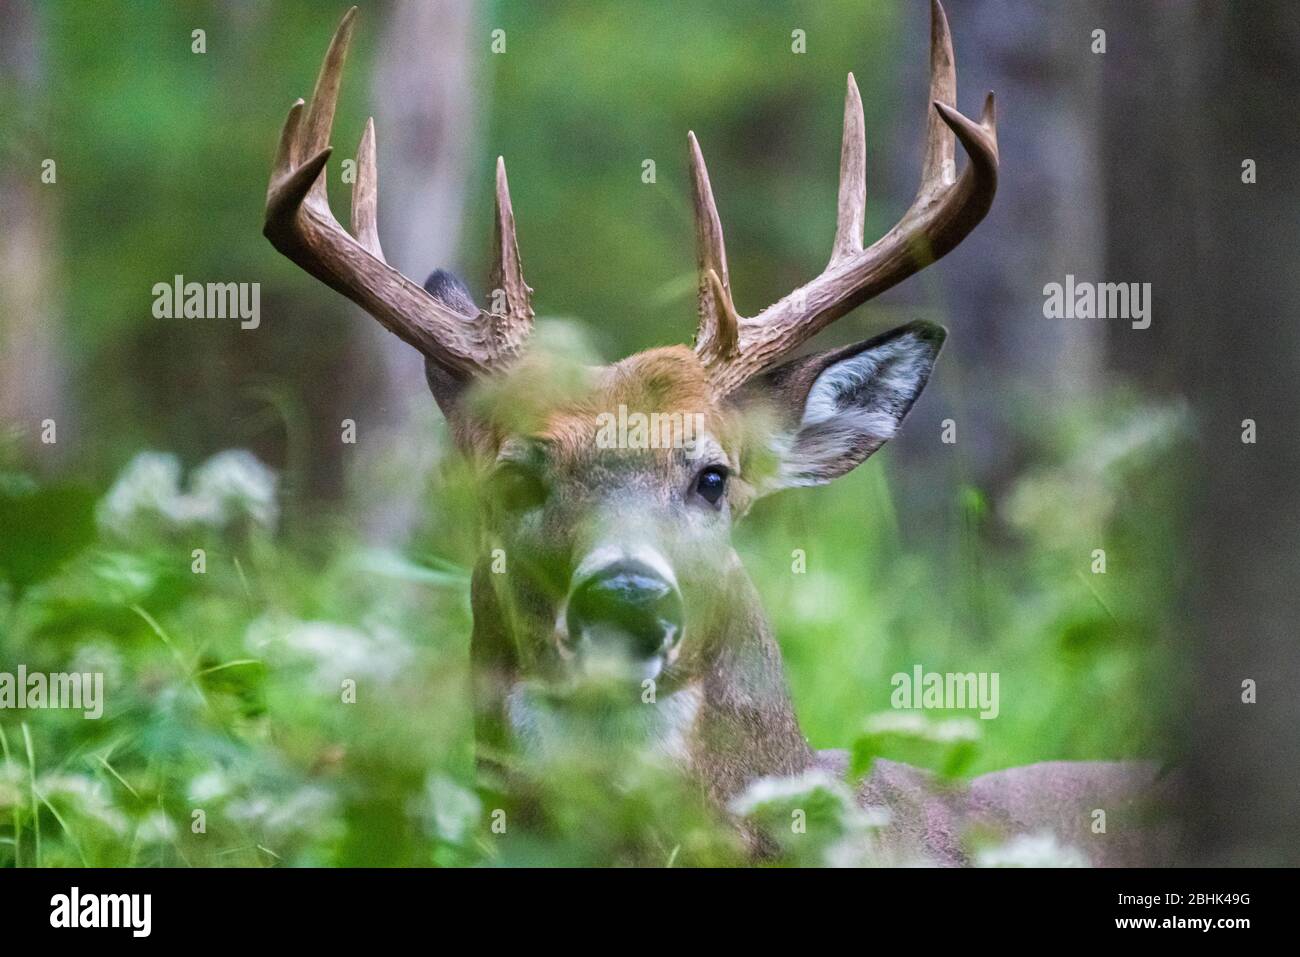 A mature male deer with large antlers can be seen poking his head through forested green vegetation. Stock Photo